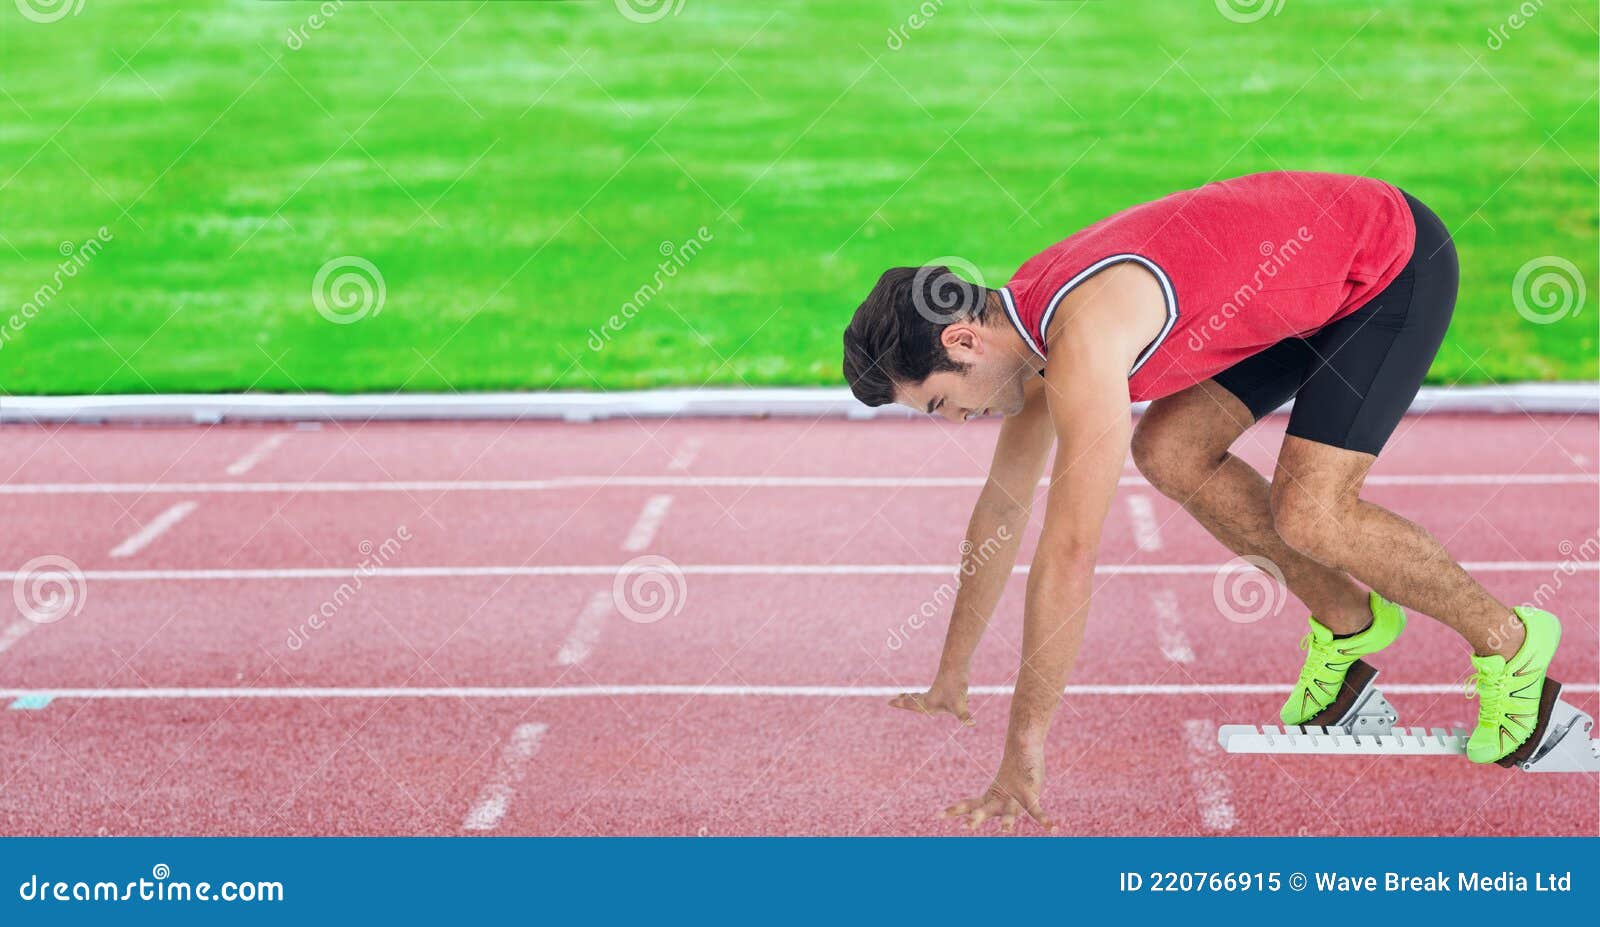 Composition of Caucasian Male Runner Over Sports Field Stock Image ...